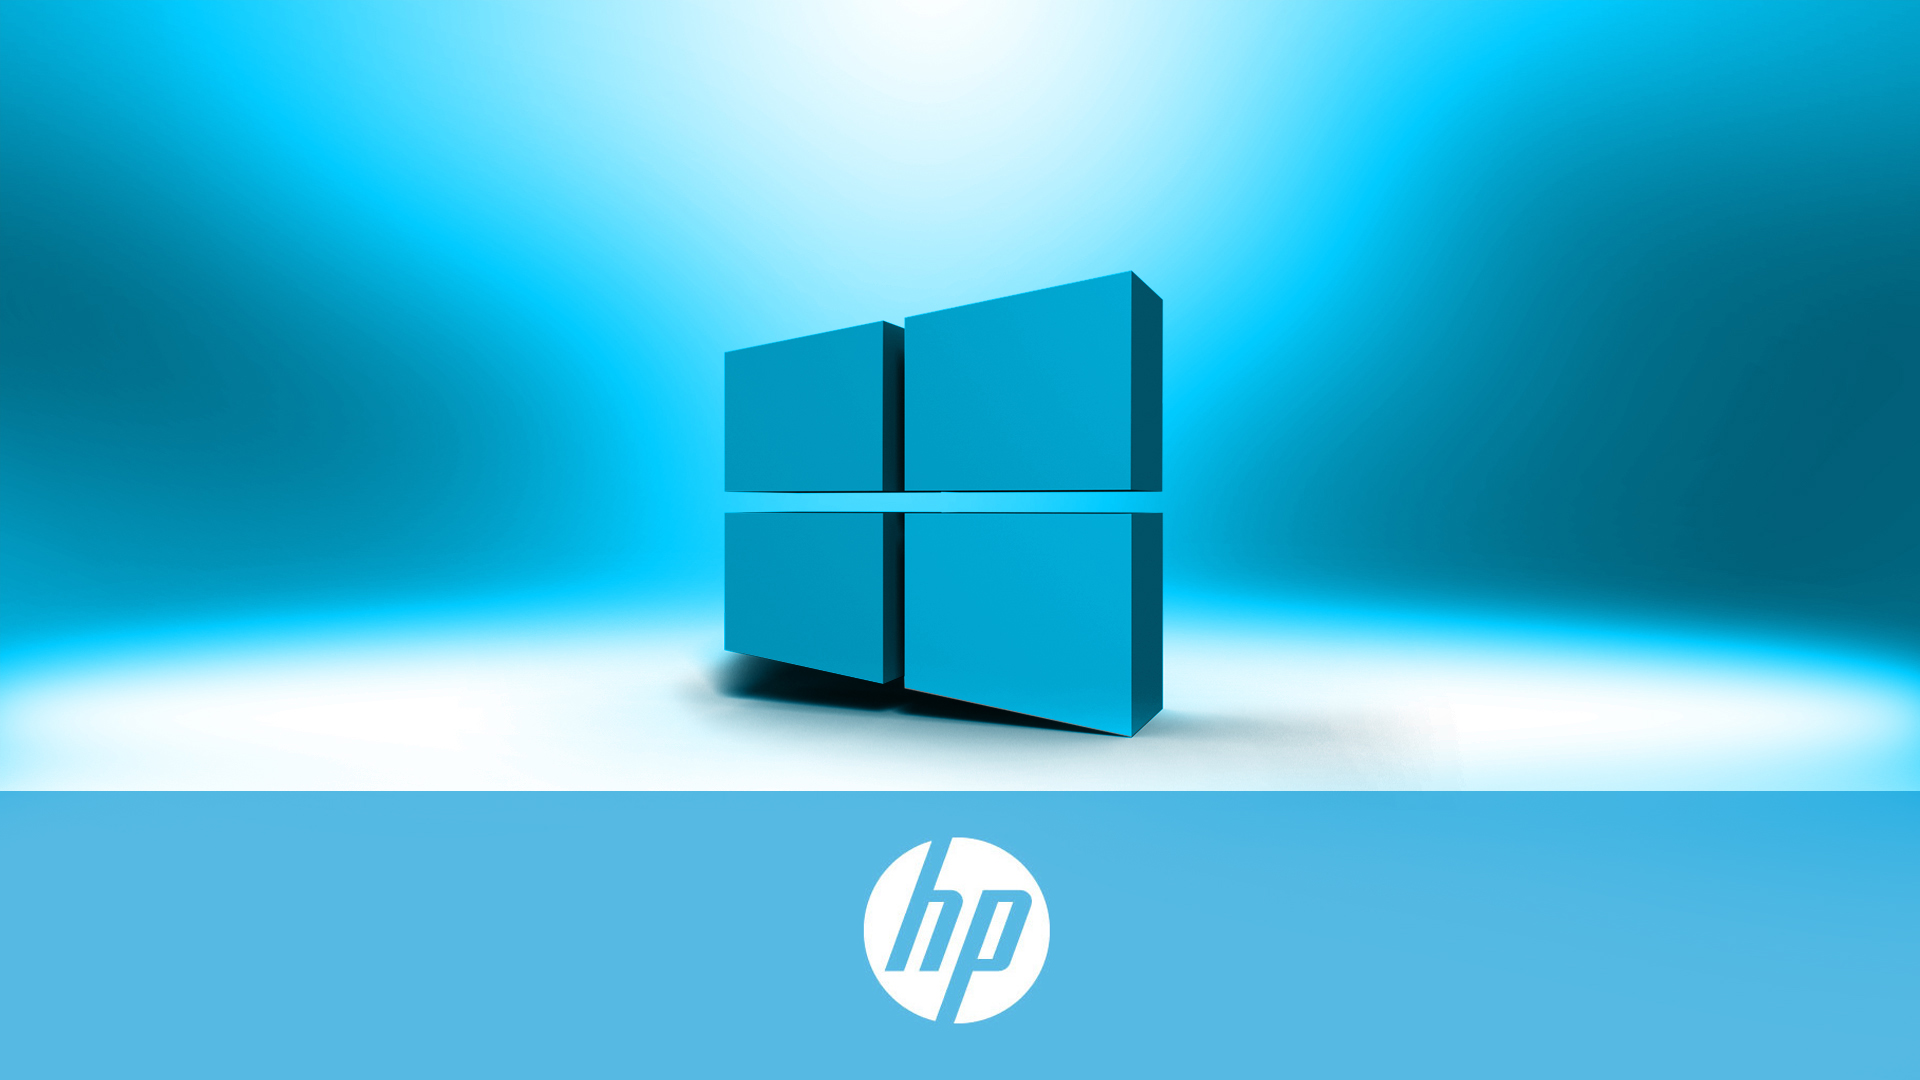 hp wallpapers for windows 10,blue,azure,technology,graphic design,rectangle